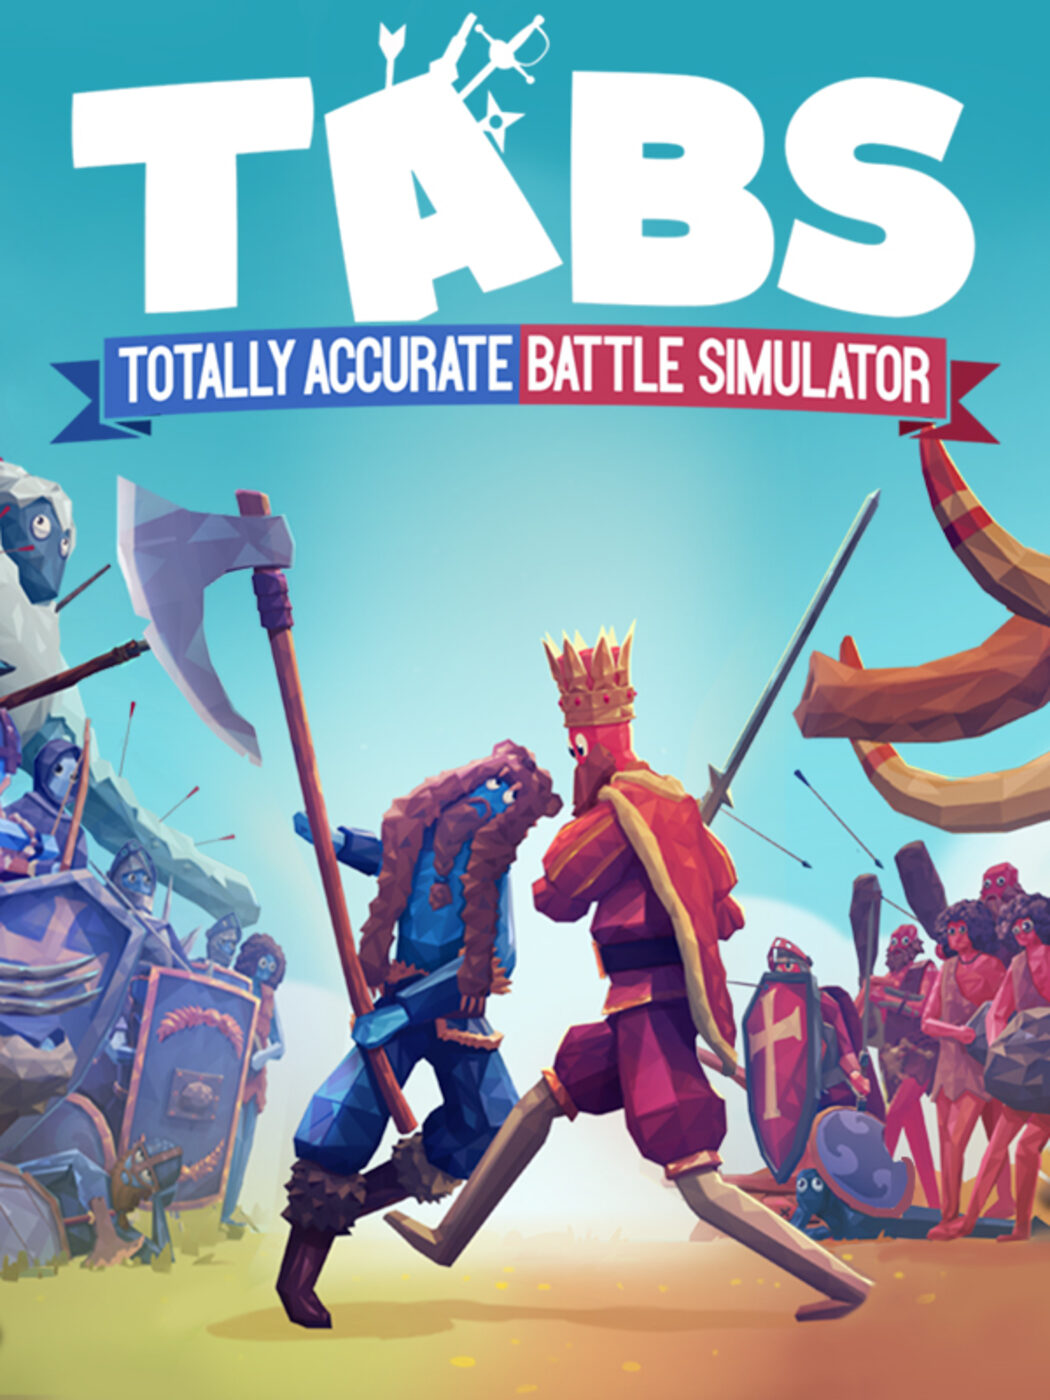 Totally accurate battle simulator tabs стим фото 4